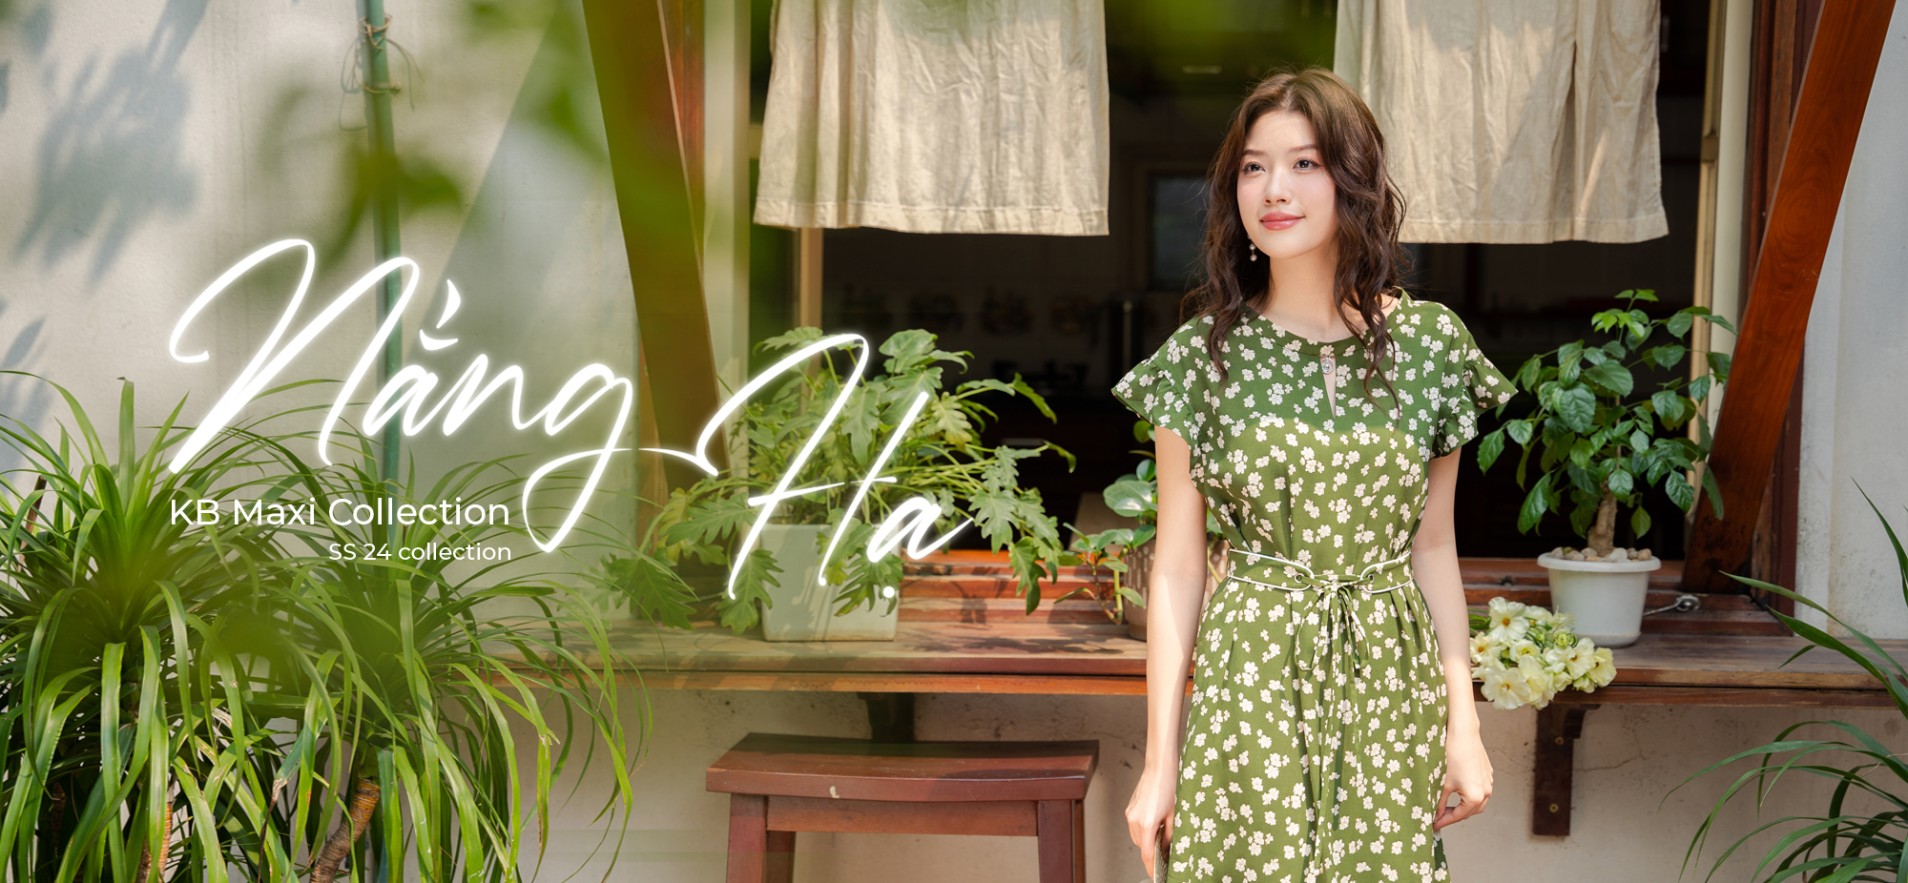 NẮNG HẠ - KB MAXI COLLECTION